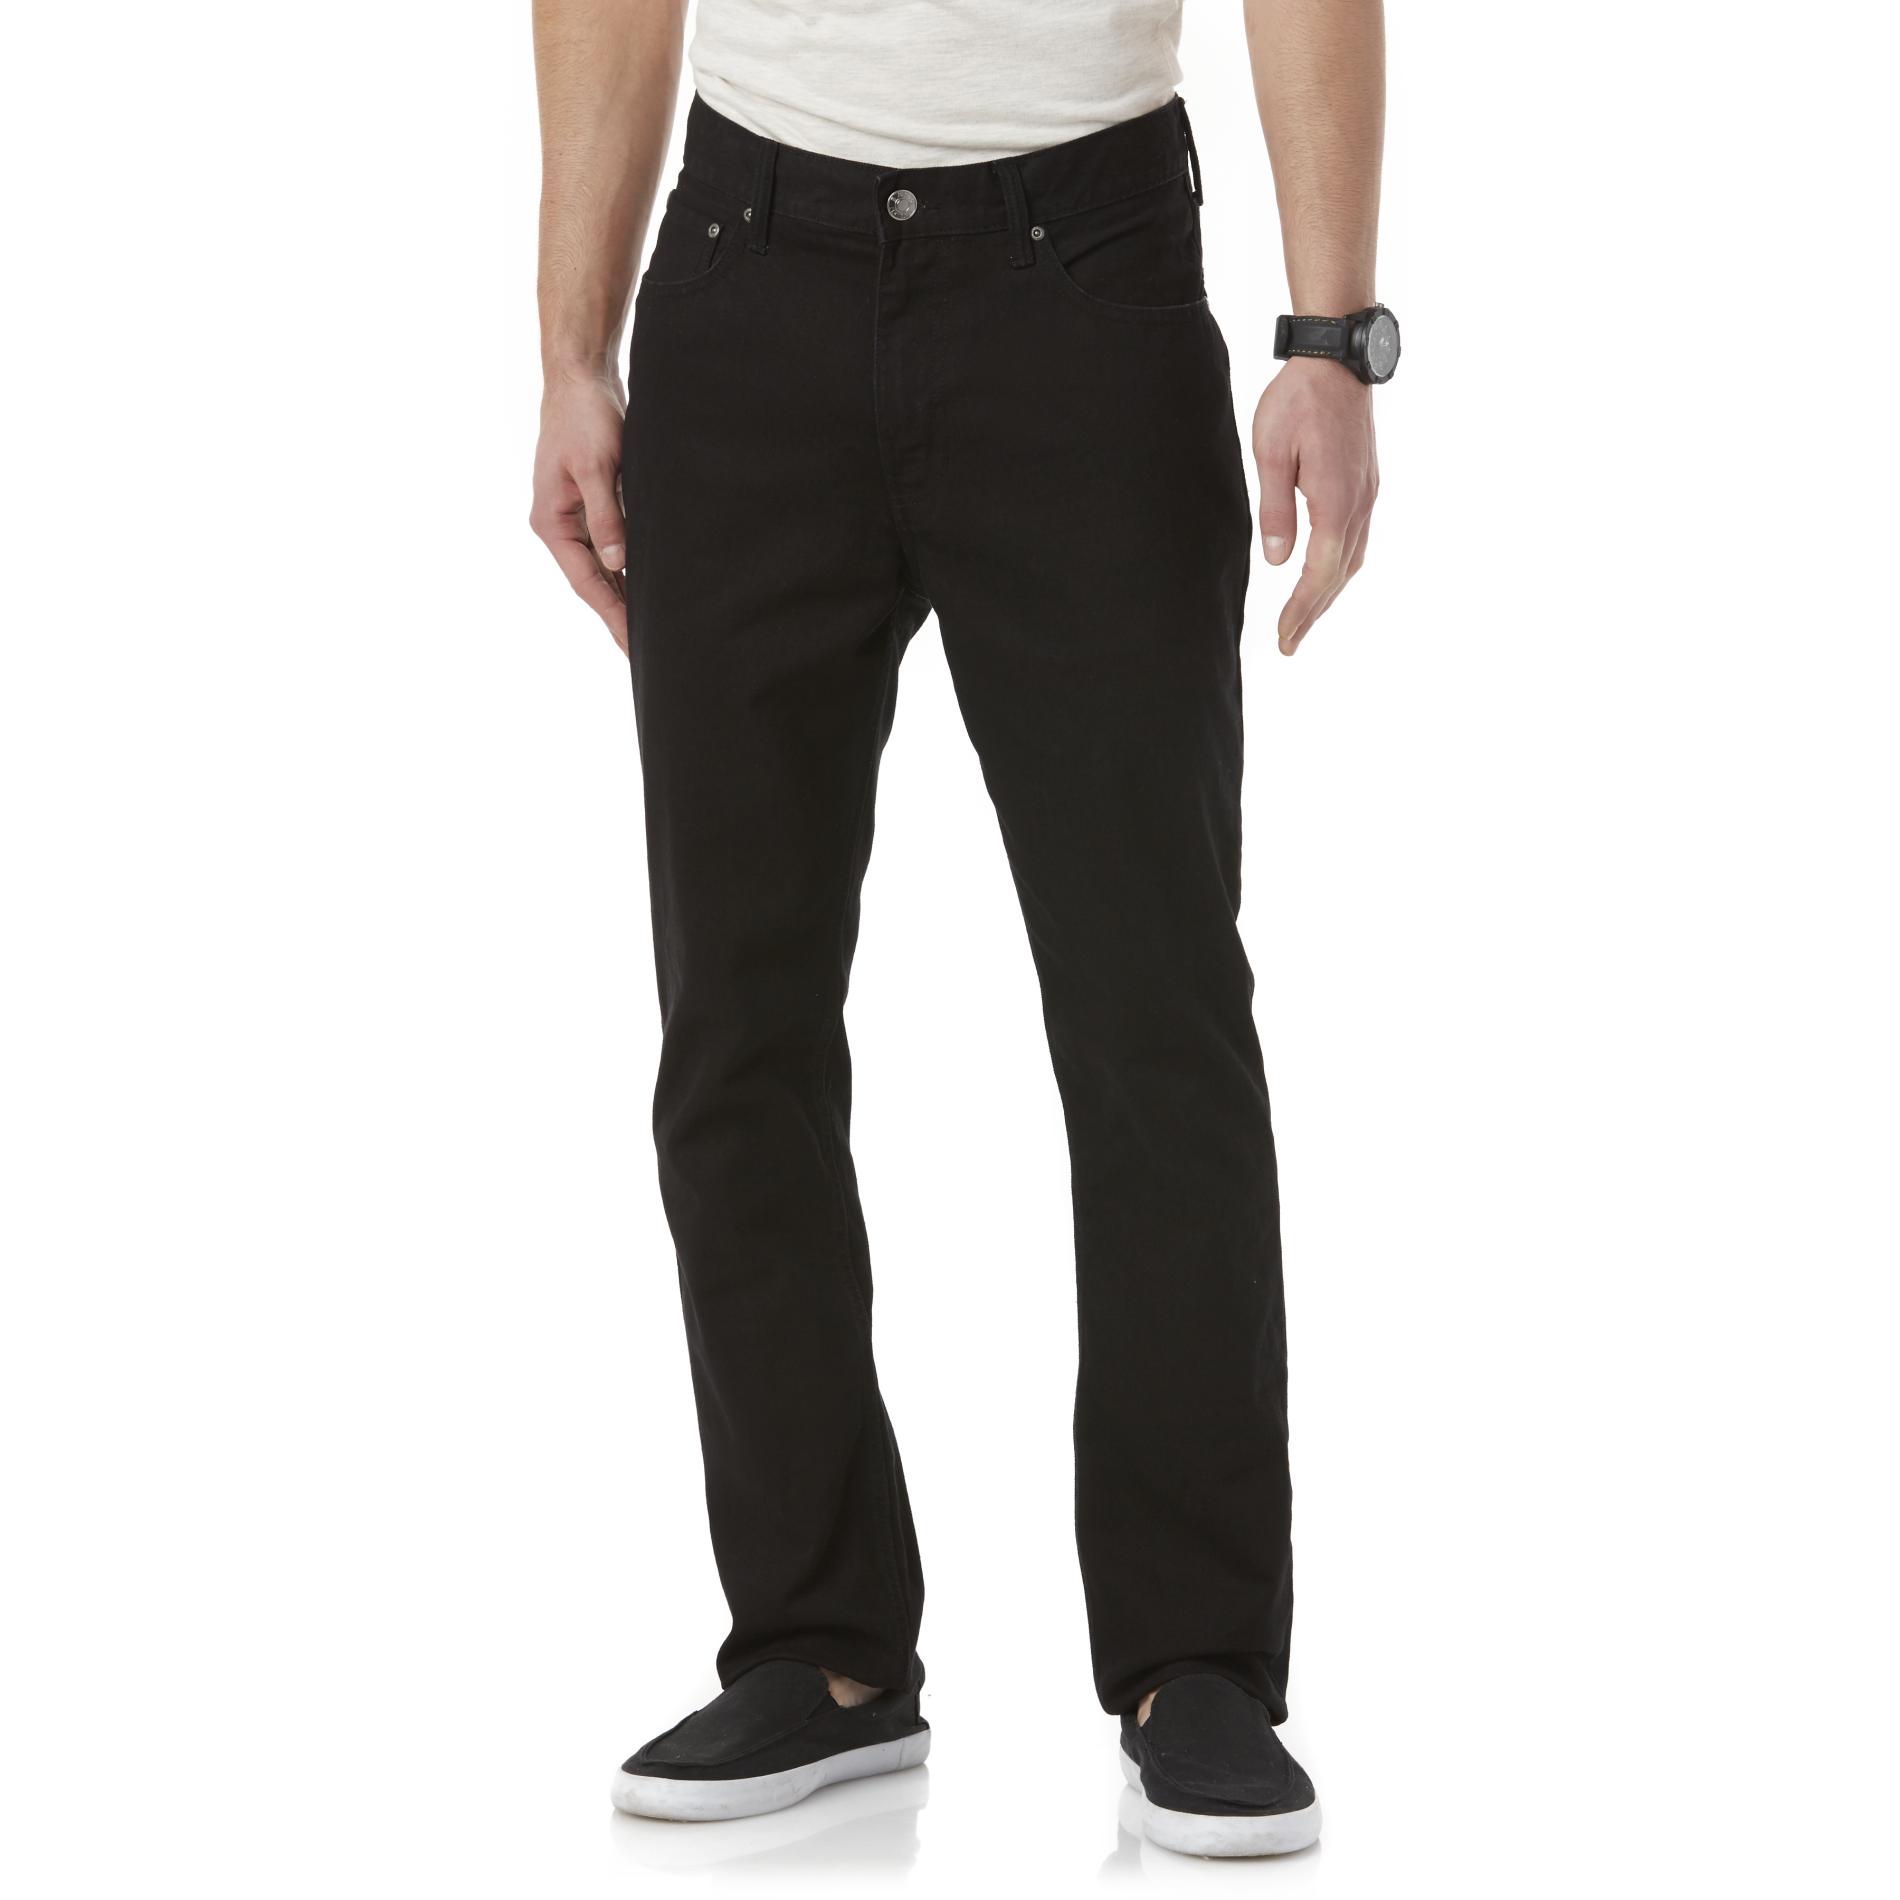 men's basic editions stretch jeans